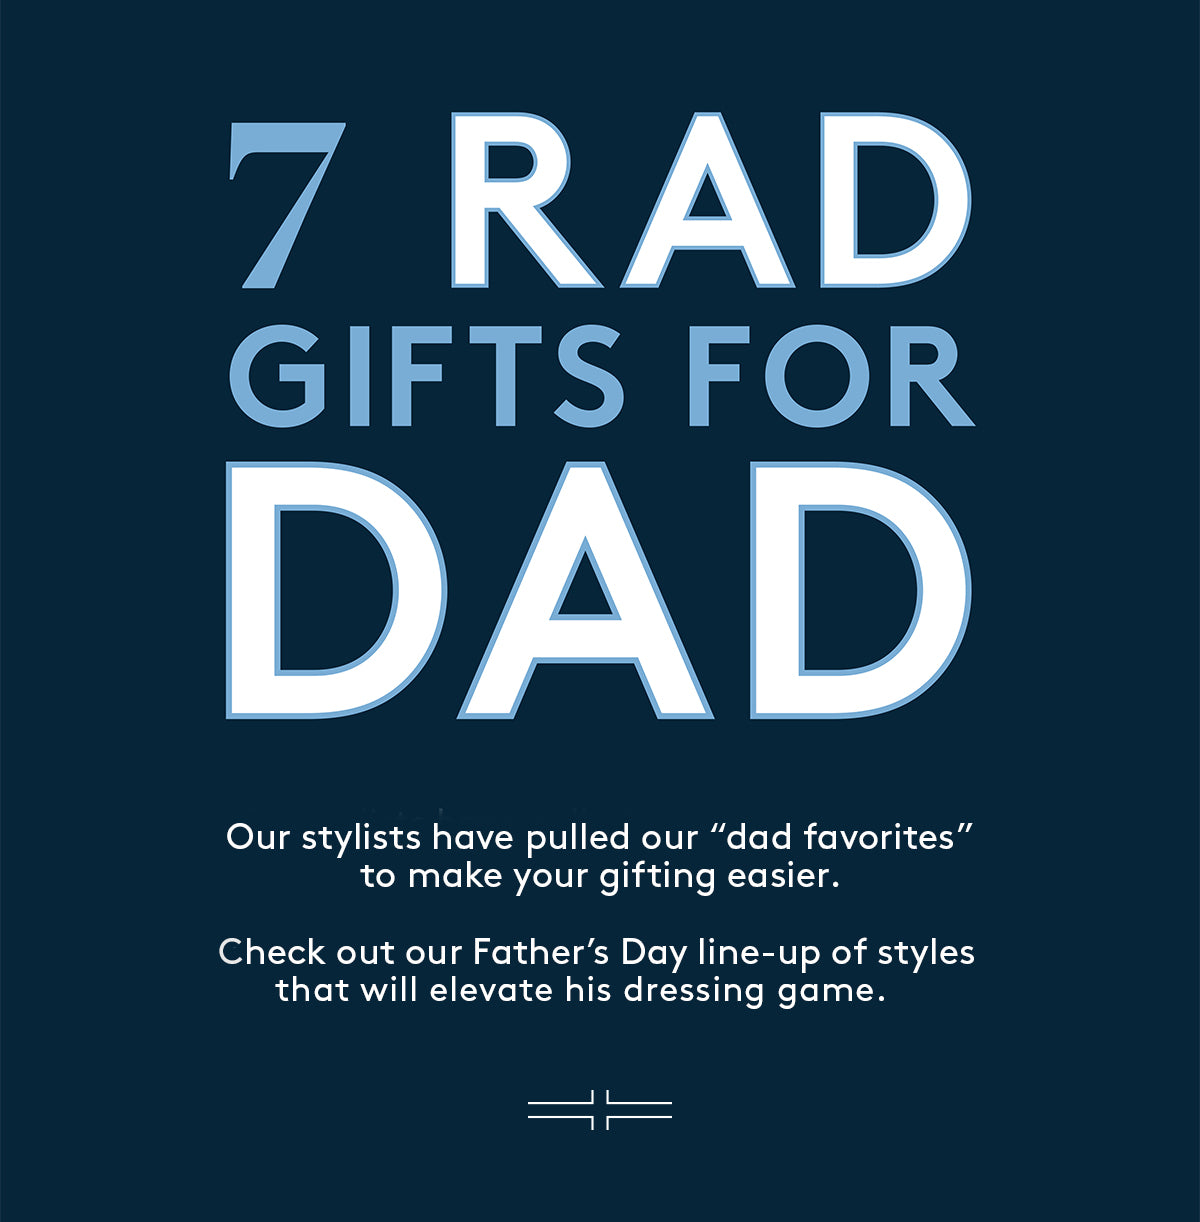 7 RAD GIFTS FOR DAD: Our stylists have pulled our "dad favorites" to make your gifting easier.  Check out our Father's Day line-up of styles that will elevate his dressing game.